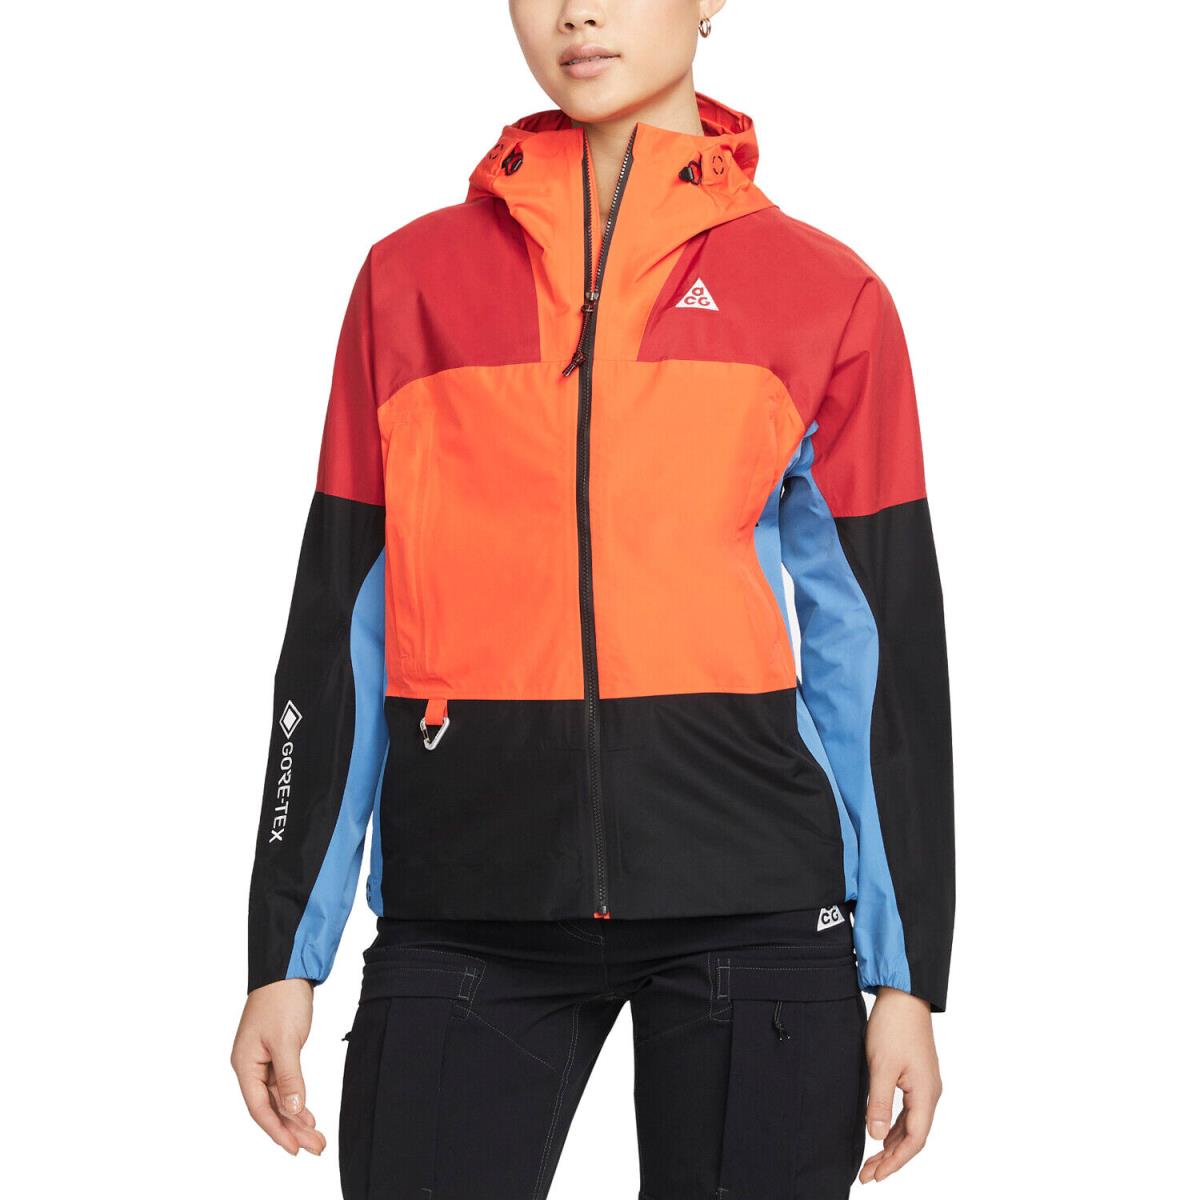 Nike Storm-fit Adv Acg Chain of Craters Women`s Jacket DB8149 Multicolor